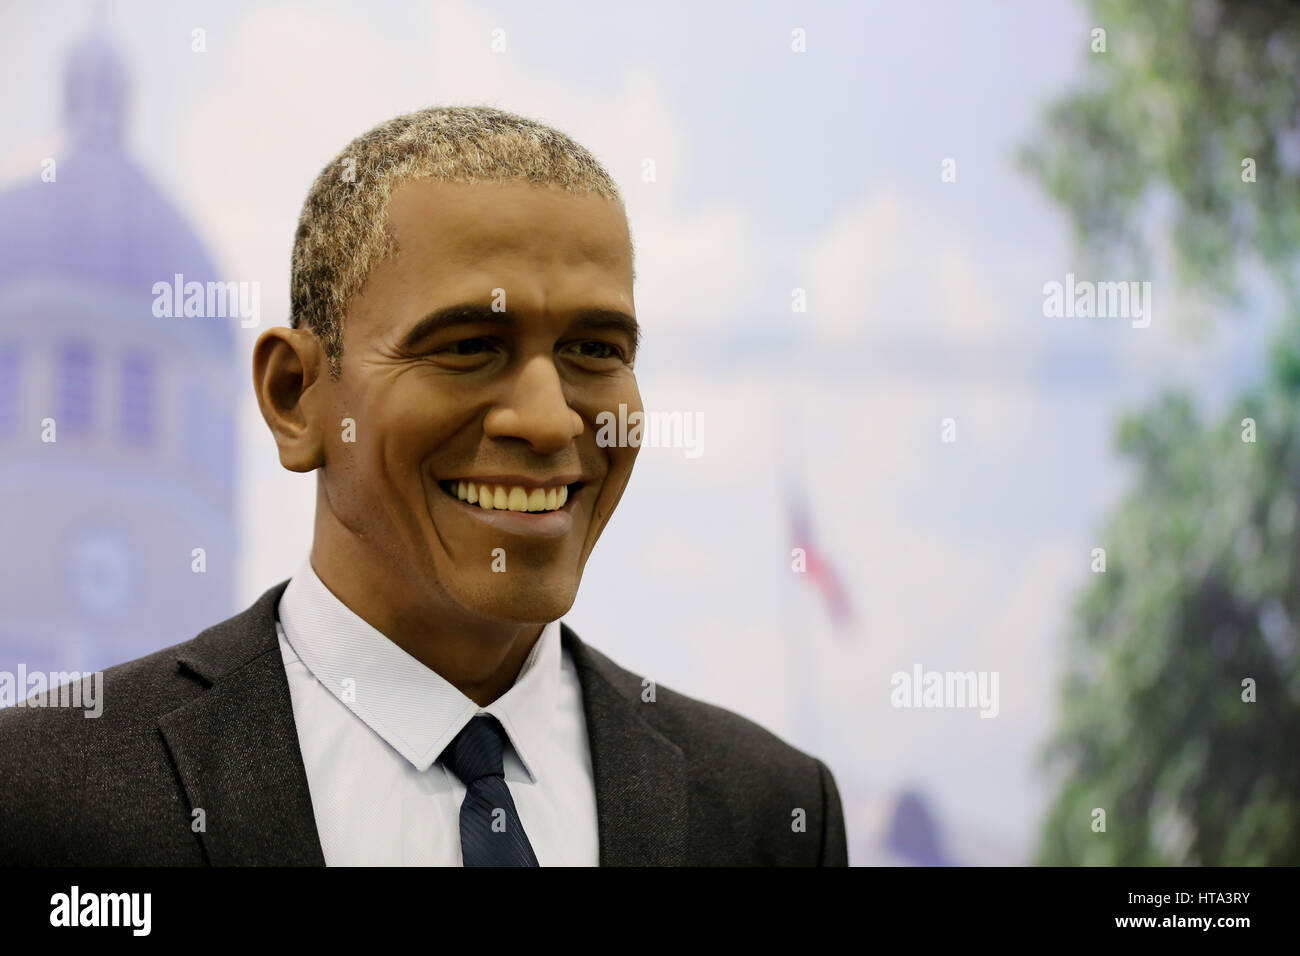 Shenyan, China. 9th Mar, 2017. A wax figure of Barack Obama at an expo in Shenyang, northeast China. Wax figures of Chinese and international celebrities can be seen at an expo in Shenyang, northeast China's Liaoning Provice, March 9th, 2017. Credit: SIPA Asia/ZUMA Wire/Alamy Live News Stock Photo